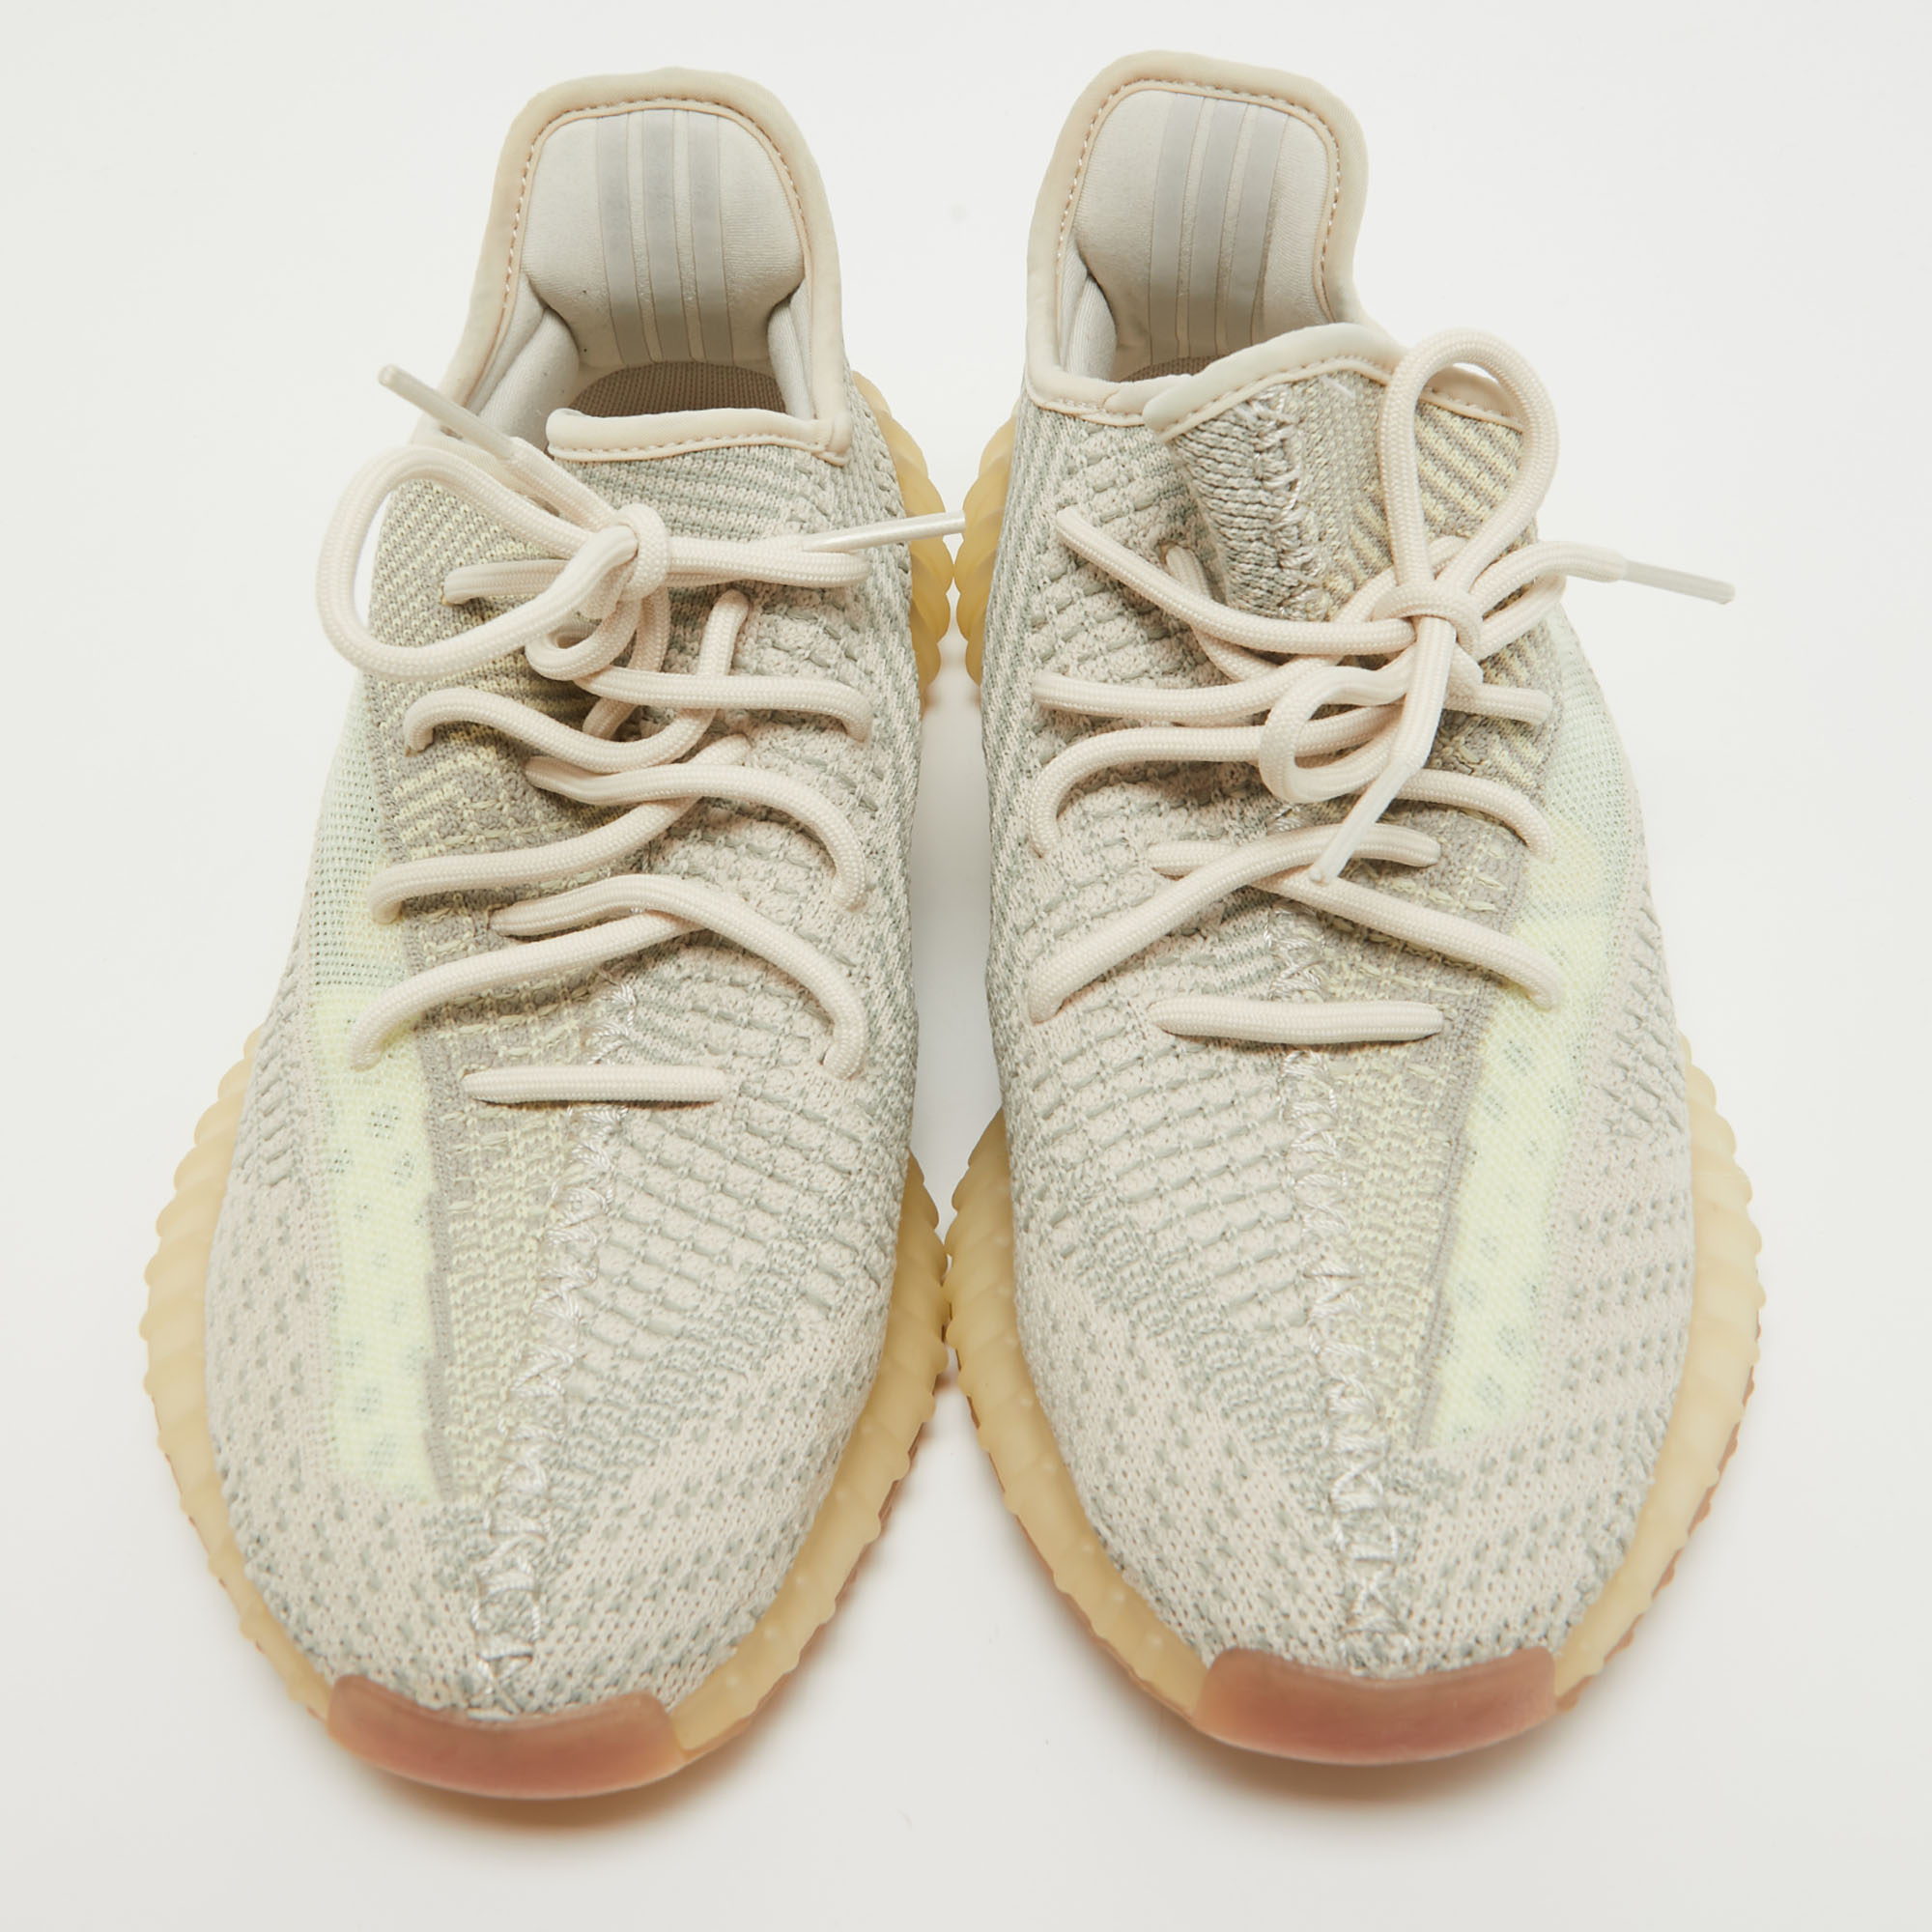 Yeezy X Adidas Beige Knit Fabric Boost 350 V2Blue Tint Sneakers Size 42 2/3